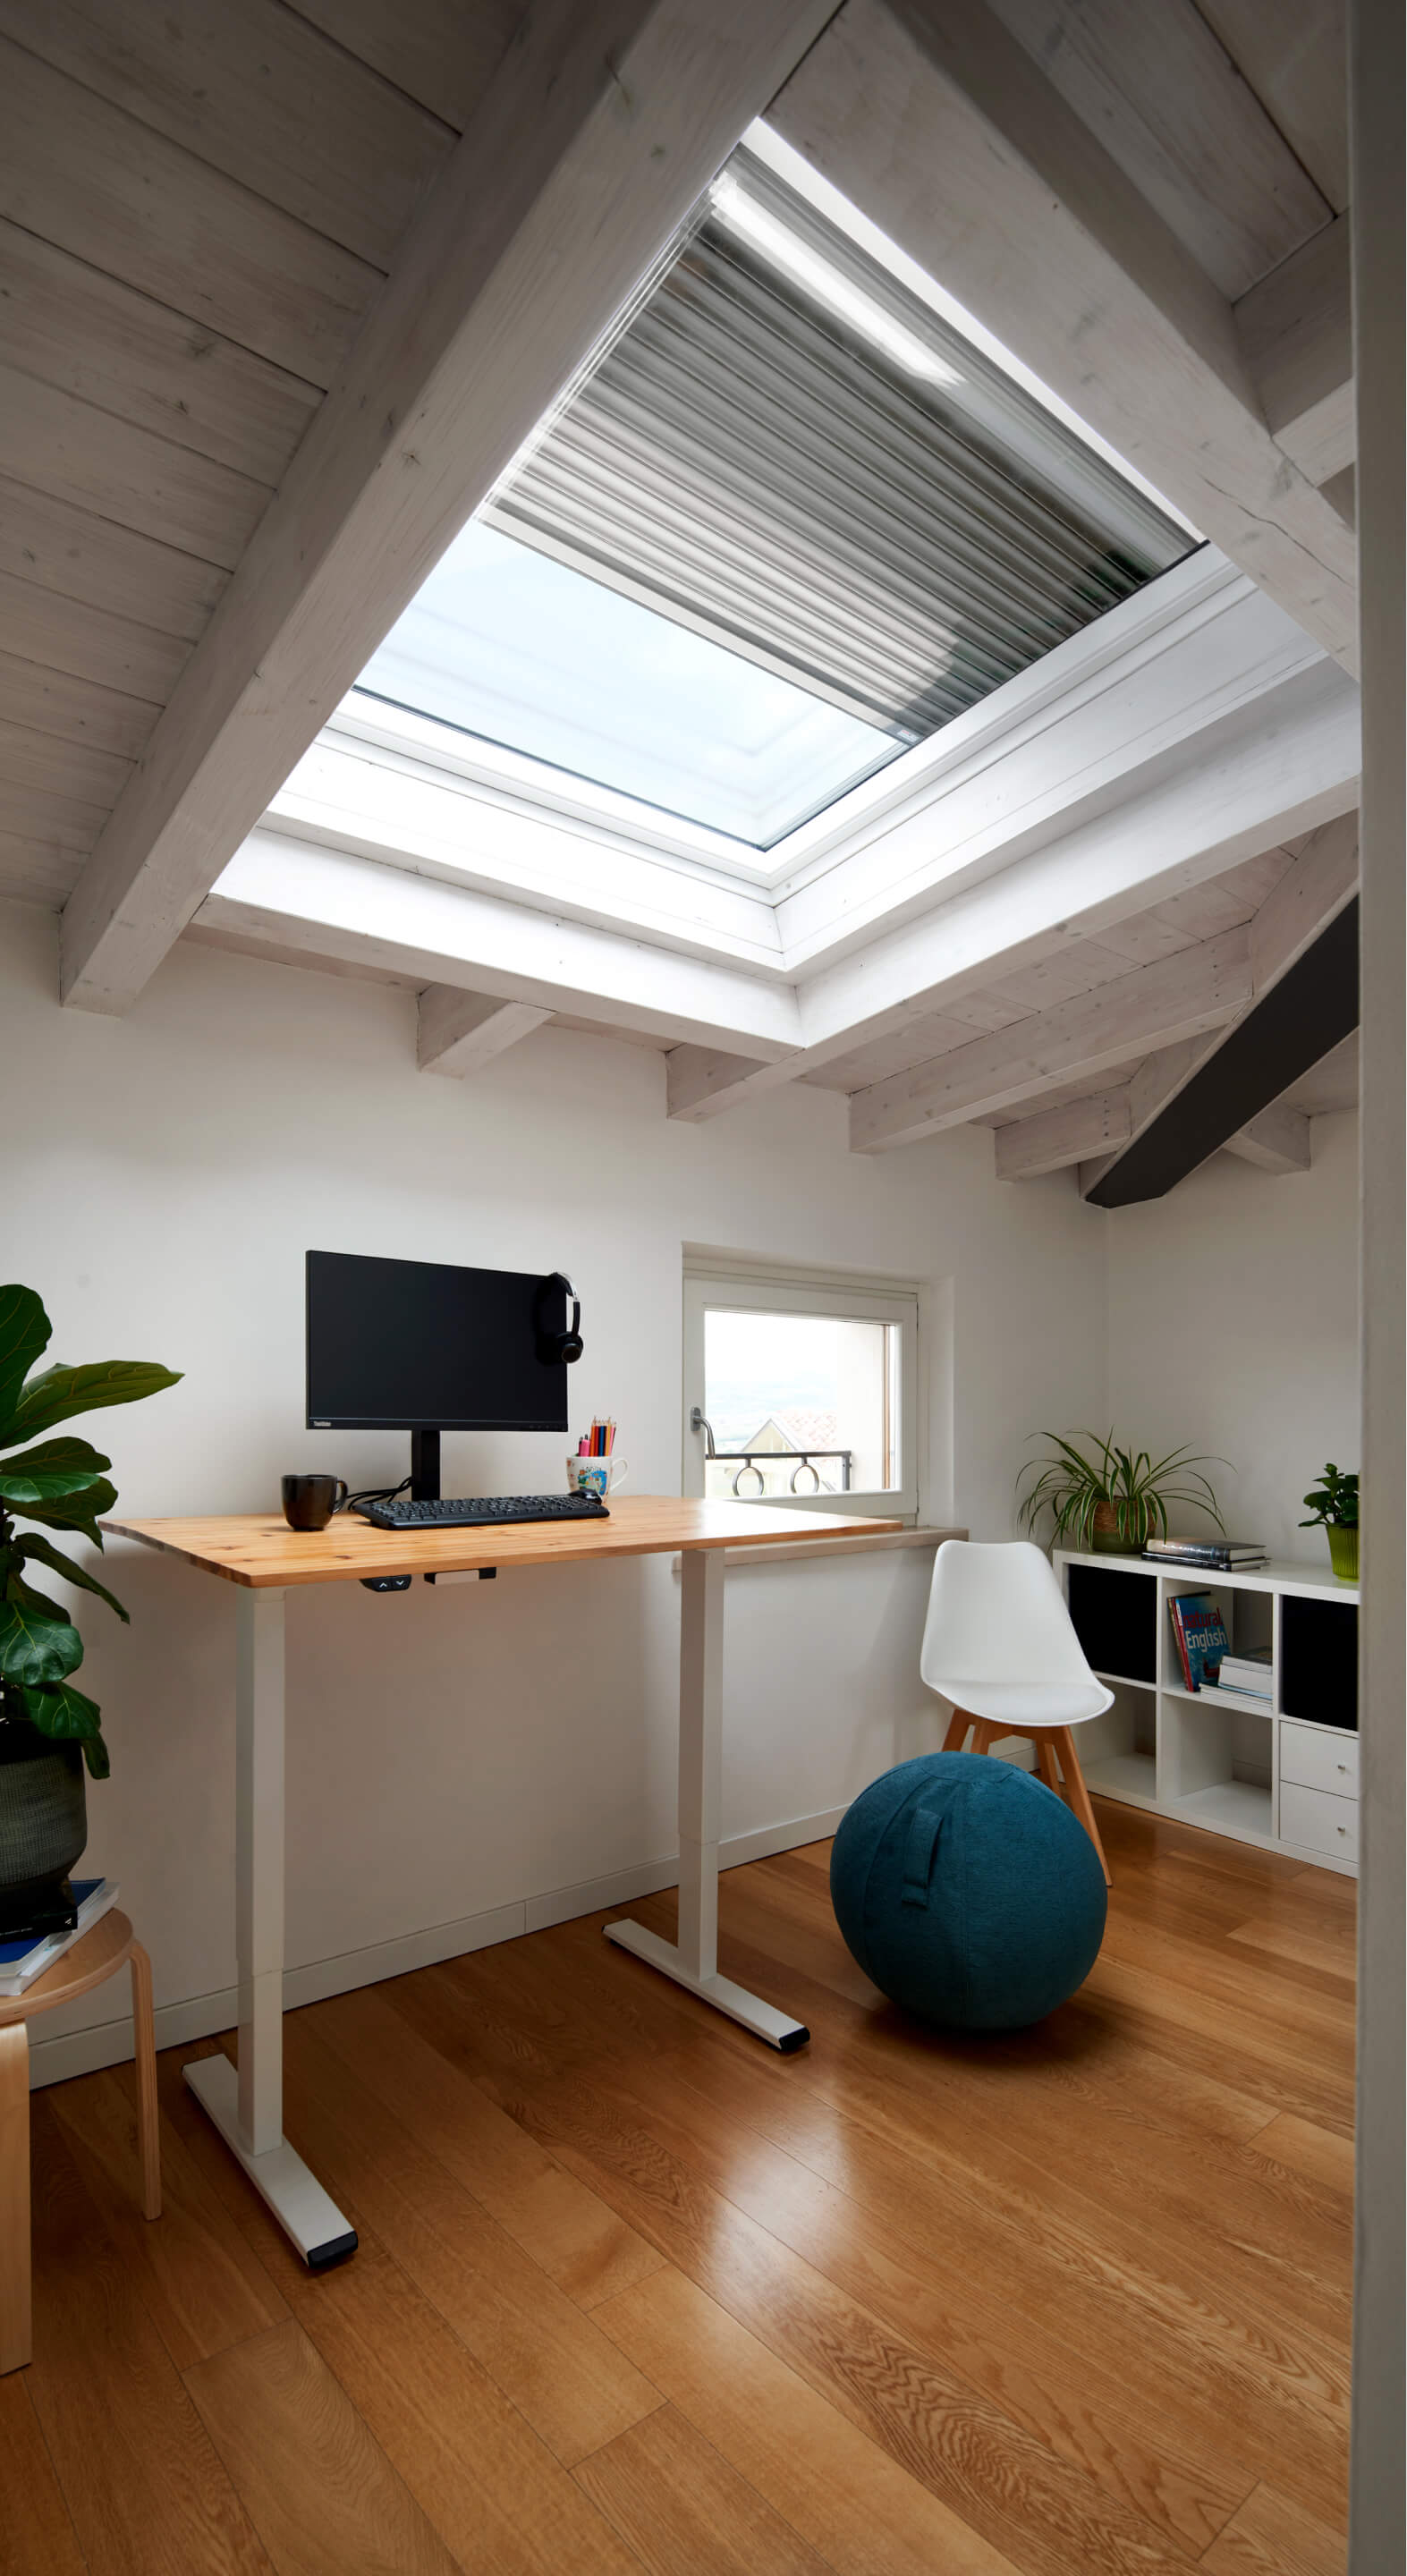 Home office space with roof window and blinds